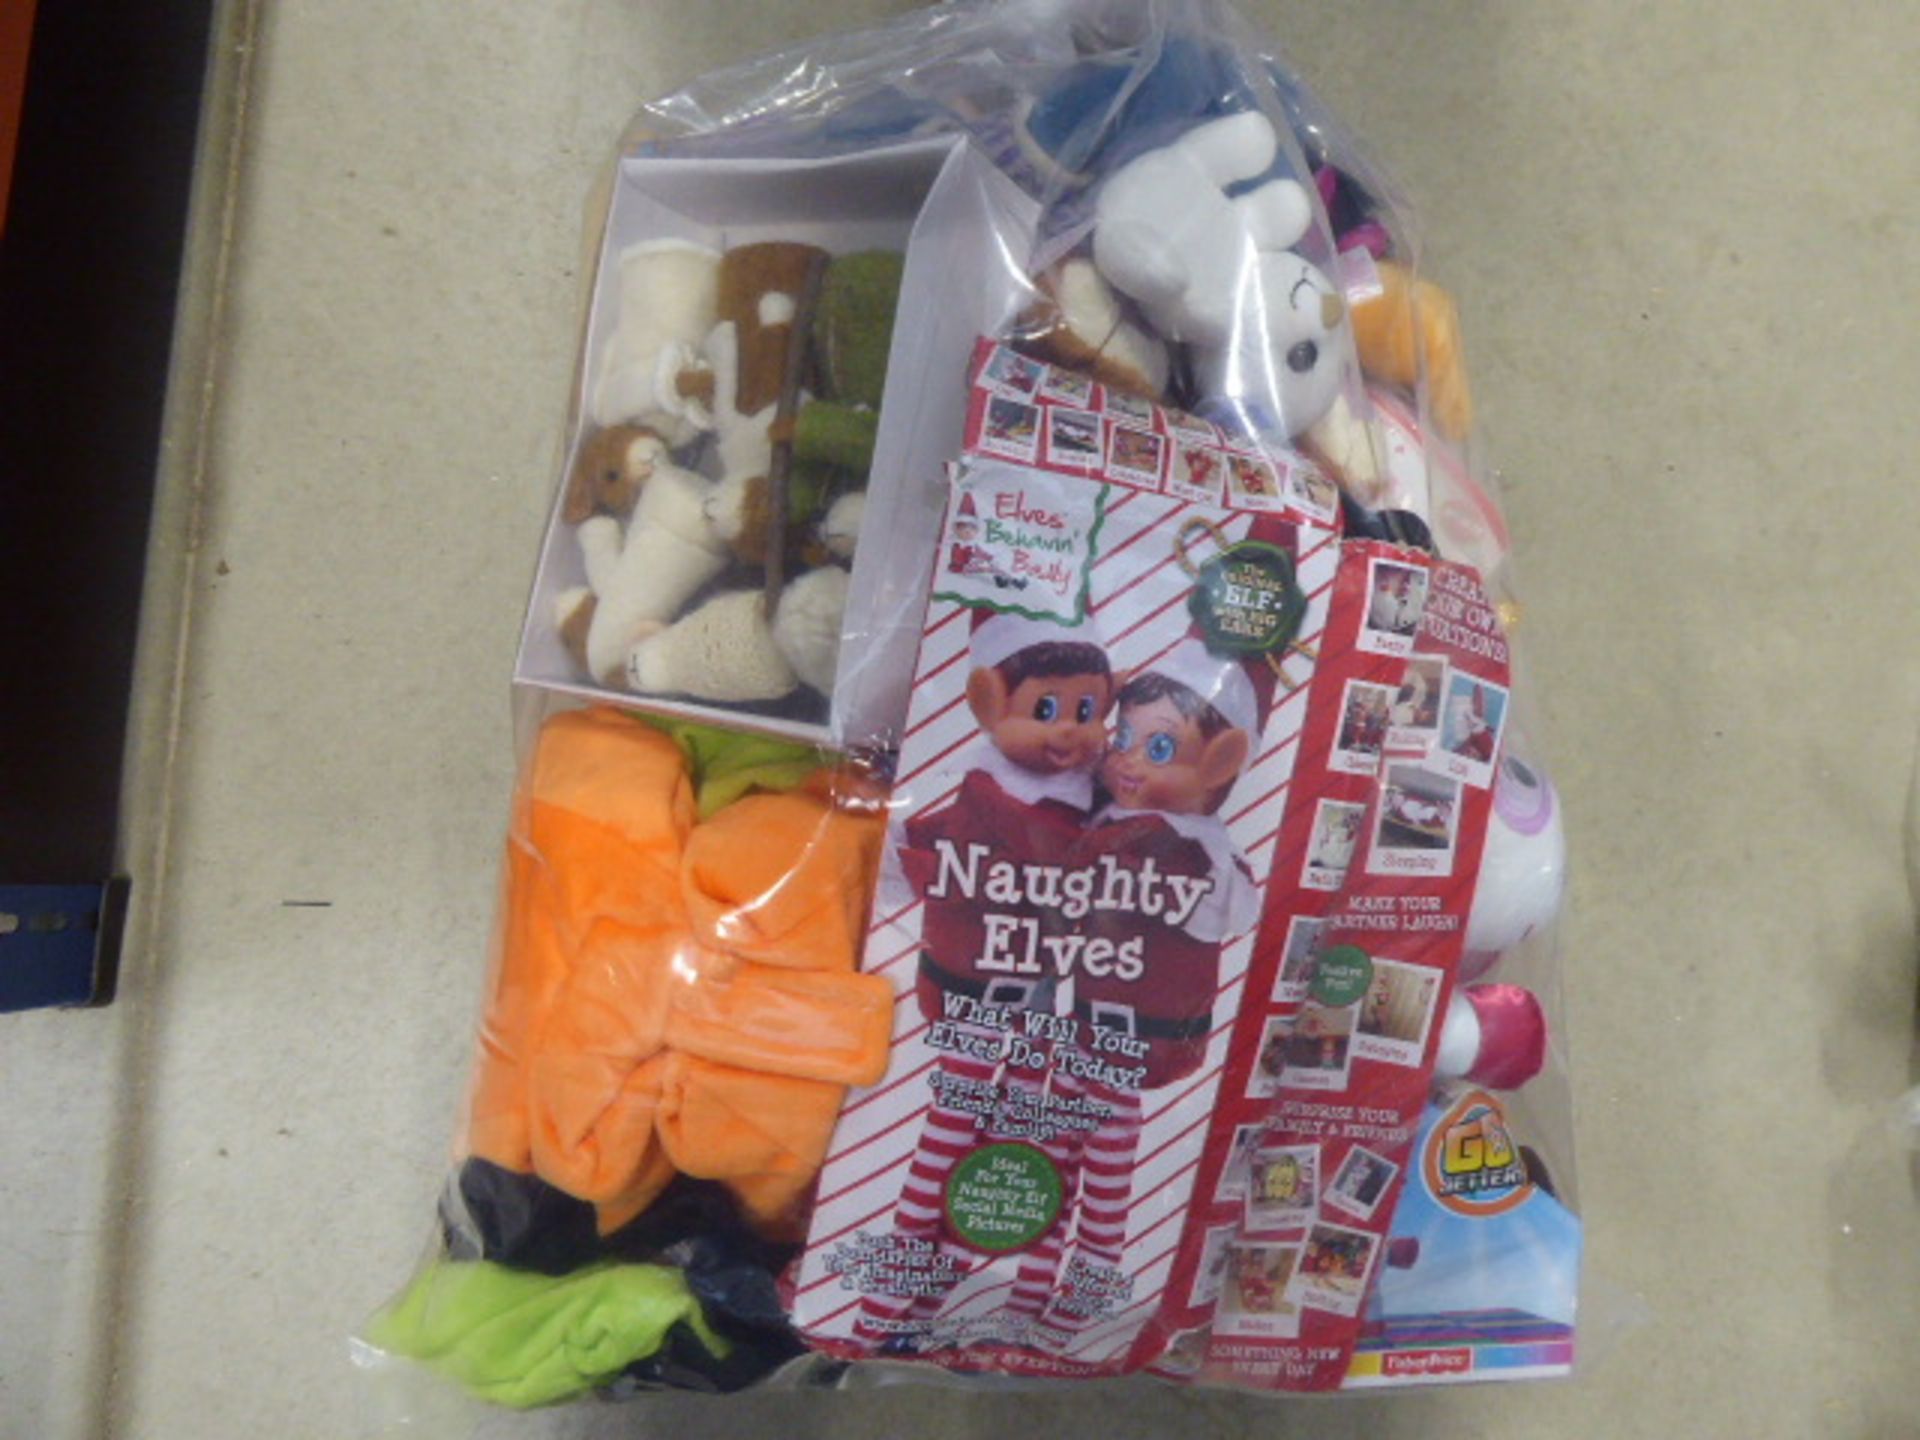 Cabbage Patch doll, Naughty Elves and selection of soft cuddly toys